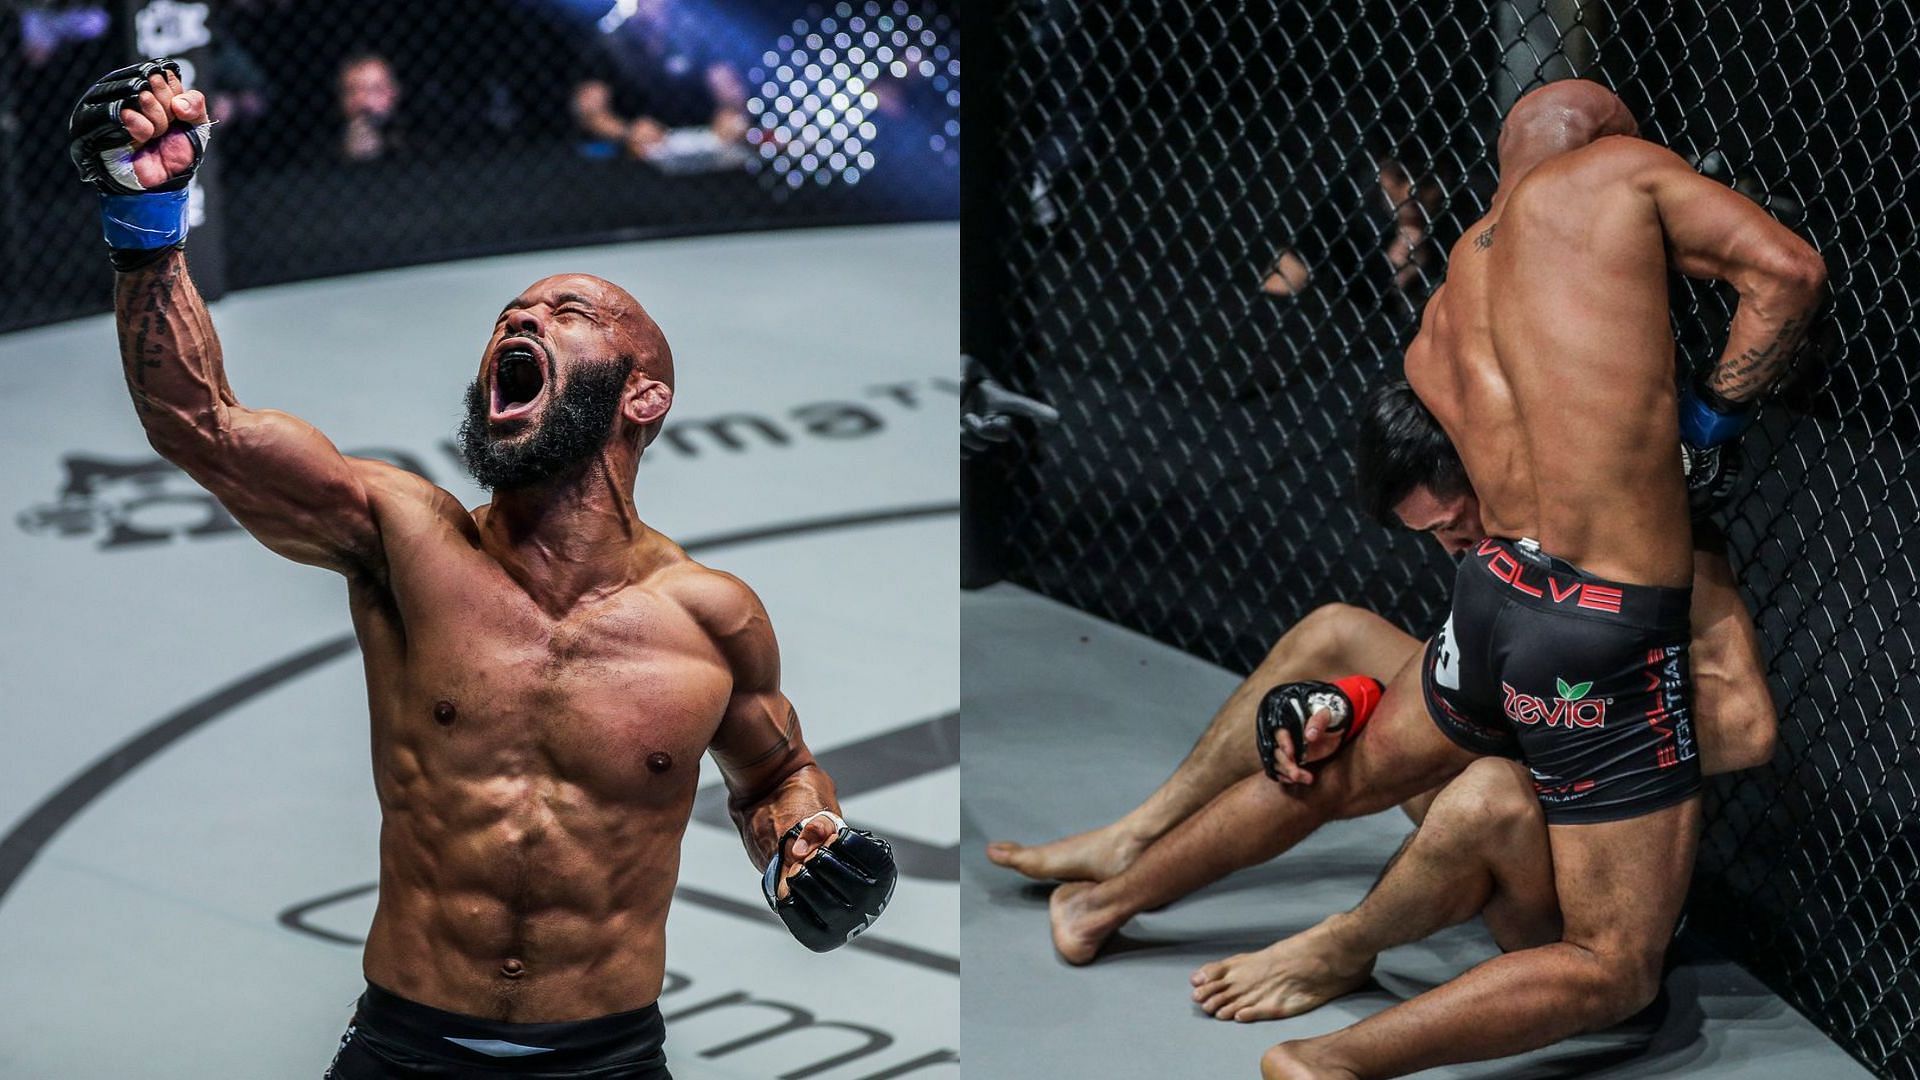 [Photo Credit: ONE Championship] &#039;Mighty Mouse&#039; Demetrious Johnson